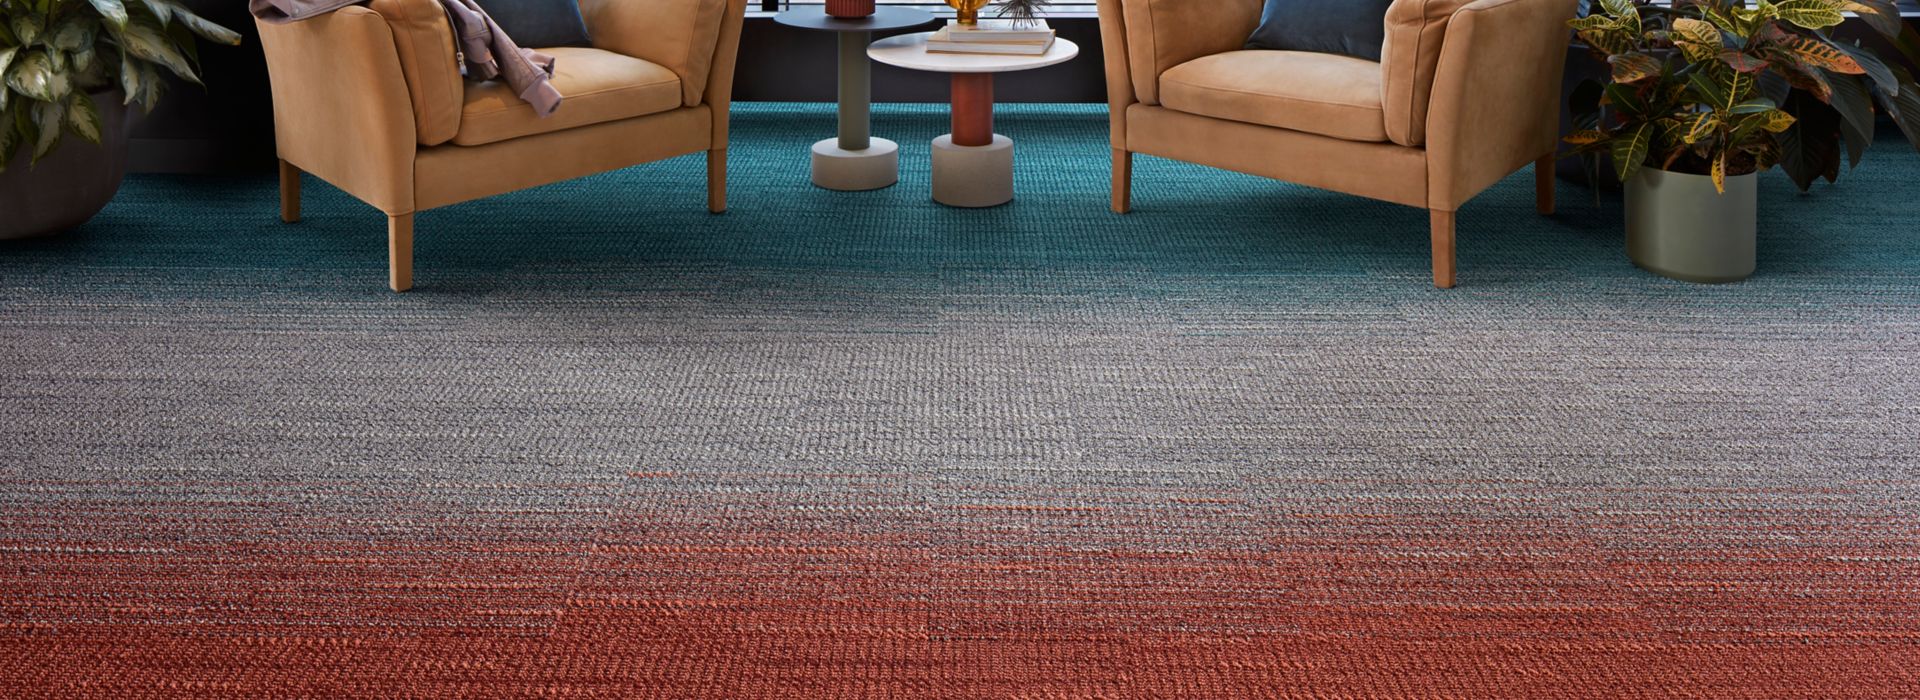 Interface WG100 and WG200 carpet tile in lobby